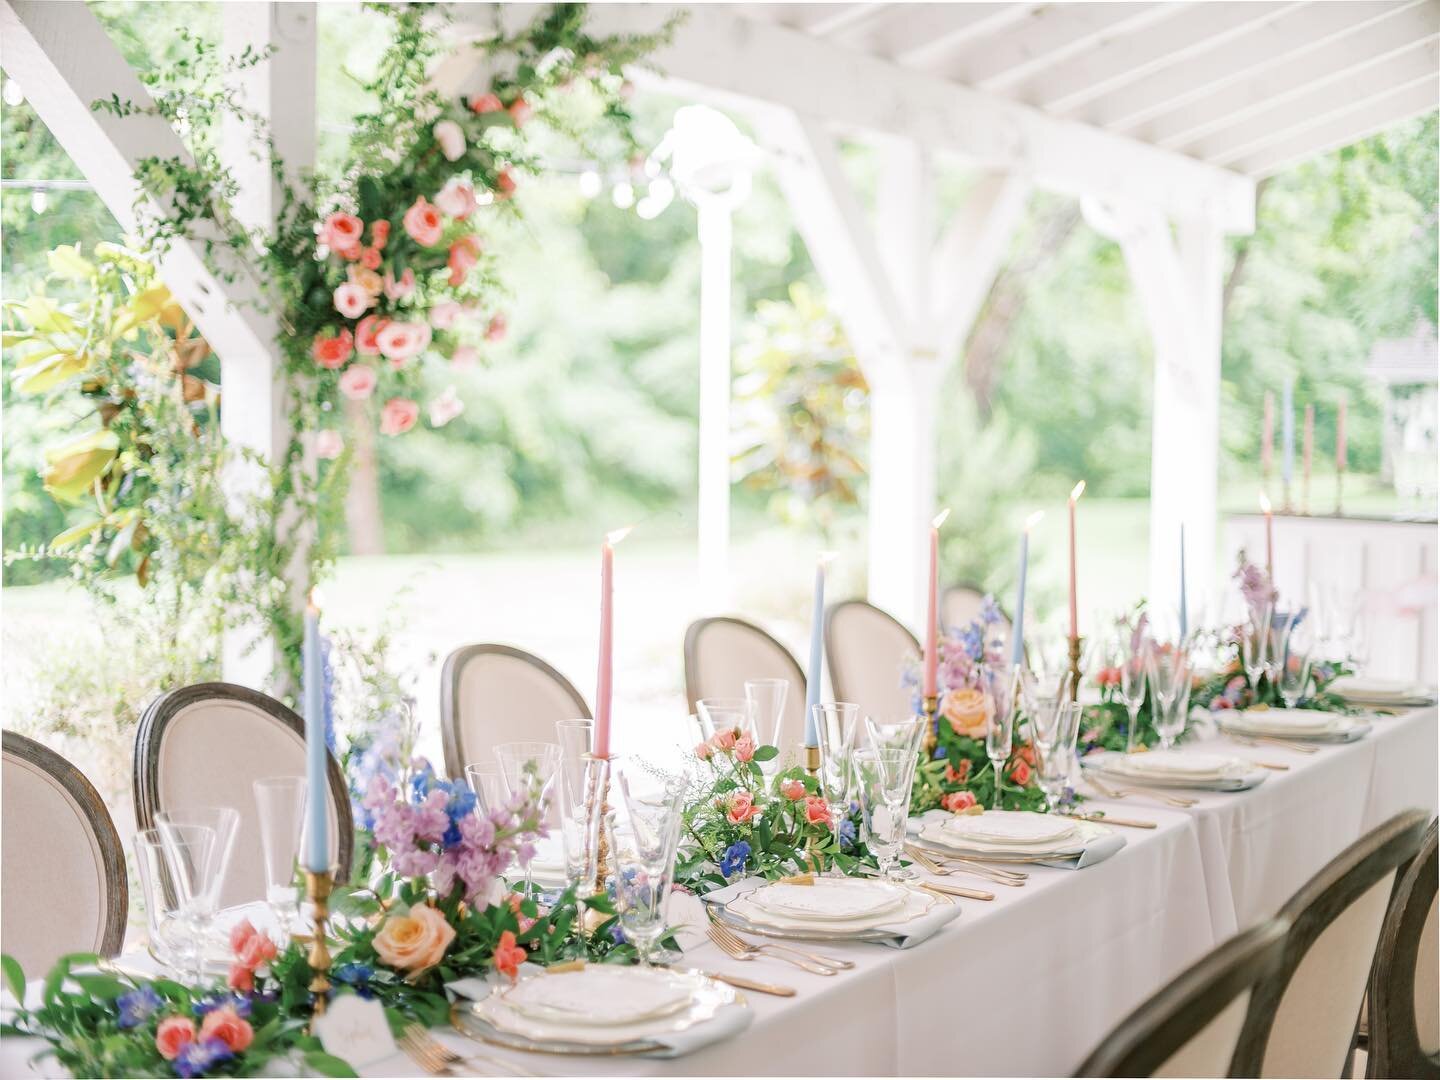 Spring, I see you!!! I&rsquo;m getting excited for all the spring flowers and weddings!!! 🤗 #bridesofok #oklahomawedding #beinspired #springwedding #weddingreception #alfresco @harpermaeevents @spainranch @lavintageok @partyperfectok @watertowheatca